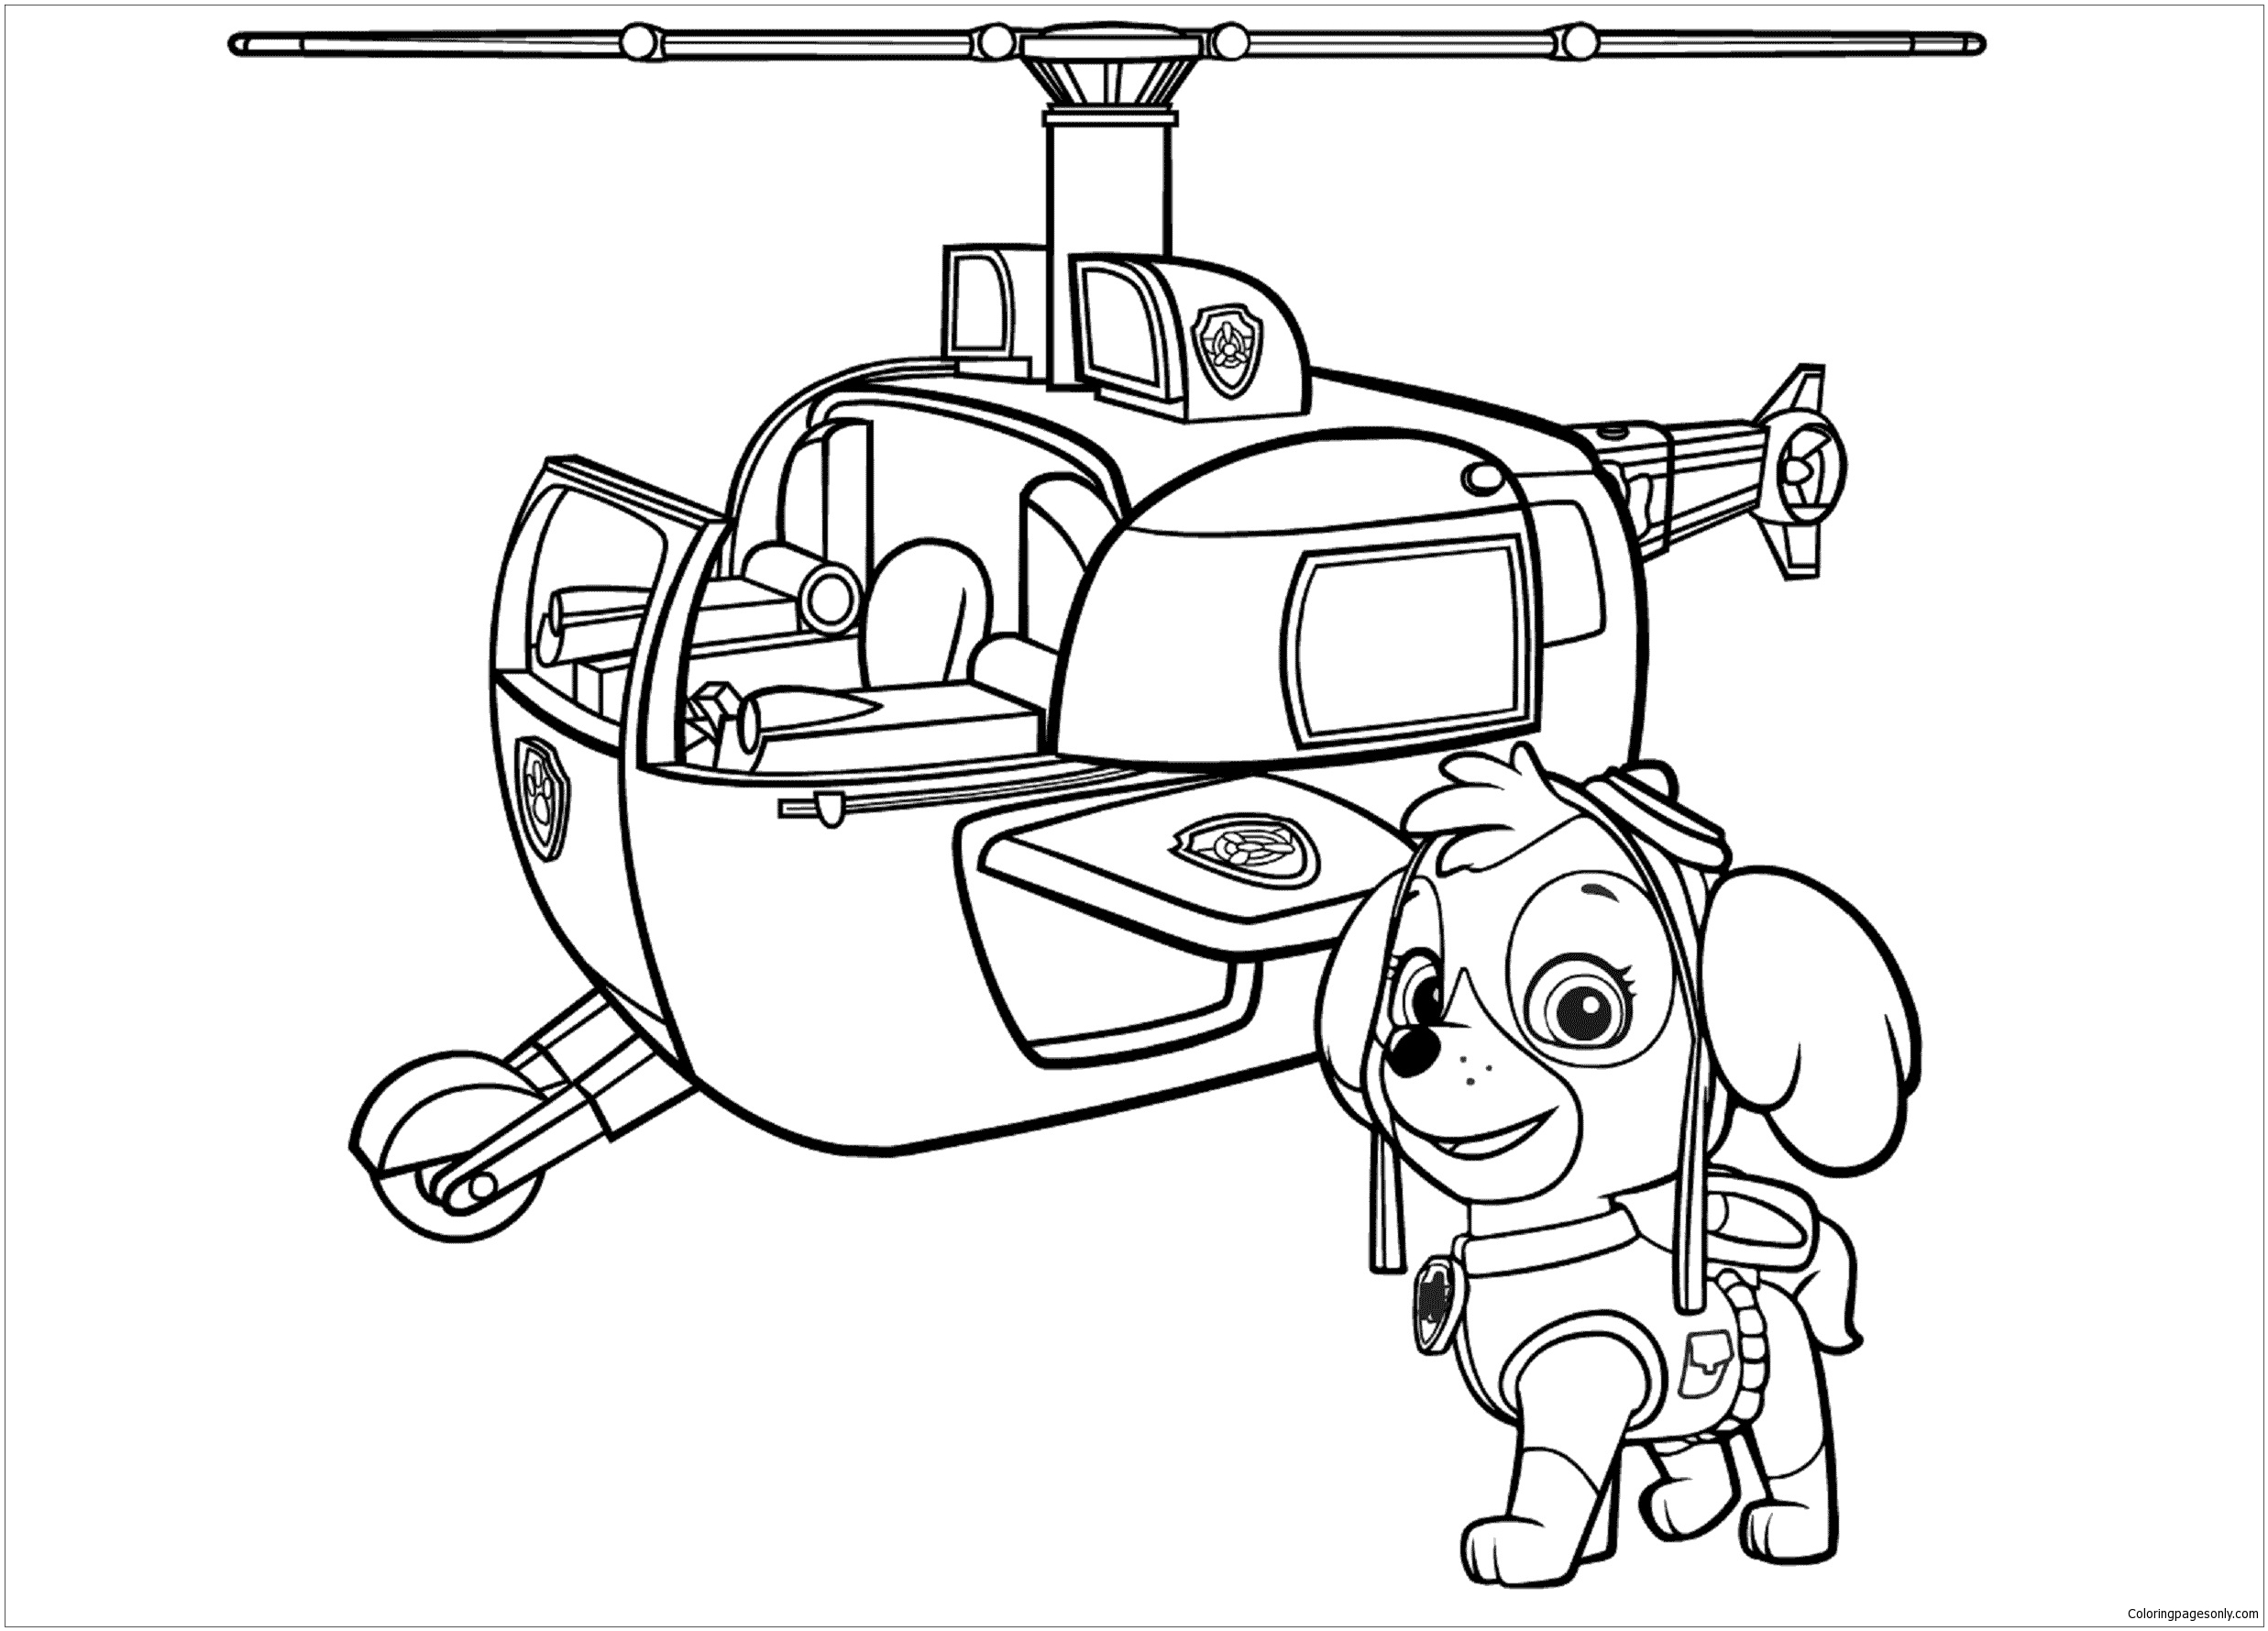 Ungdom hobby tendens Paw Patrol Skyes Helicopter Paw Patrol Coloring Pages - Cartoons Coloring  Pages - Coloring Pages For Kids And Adults